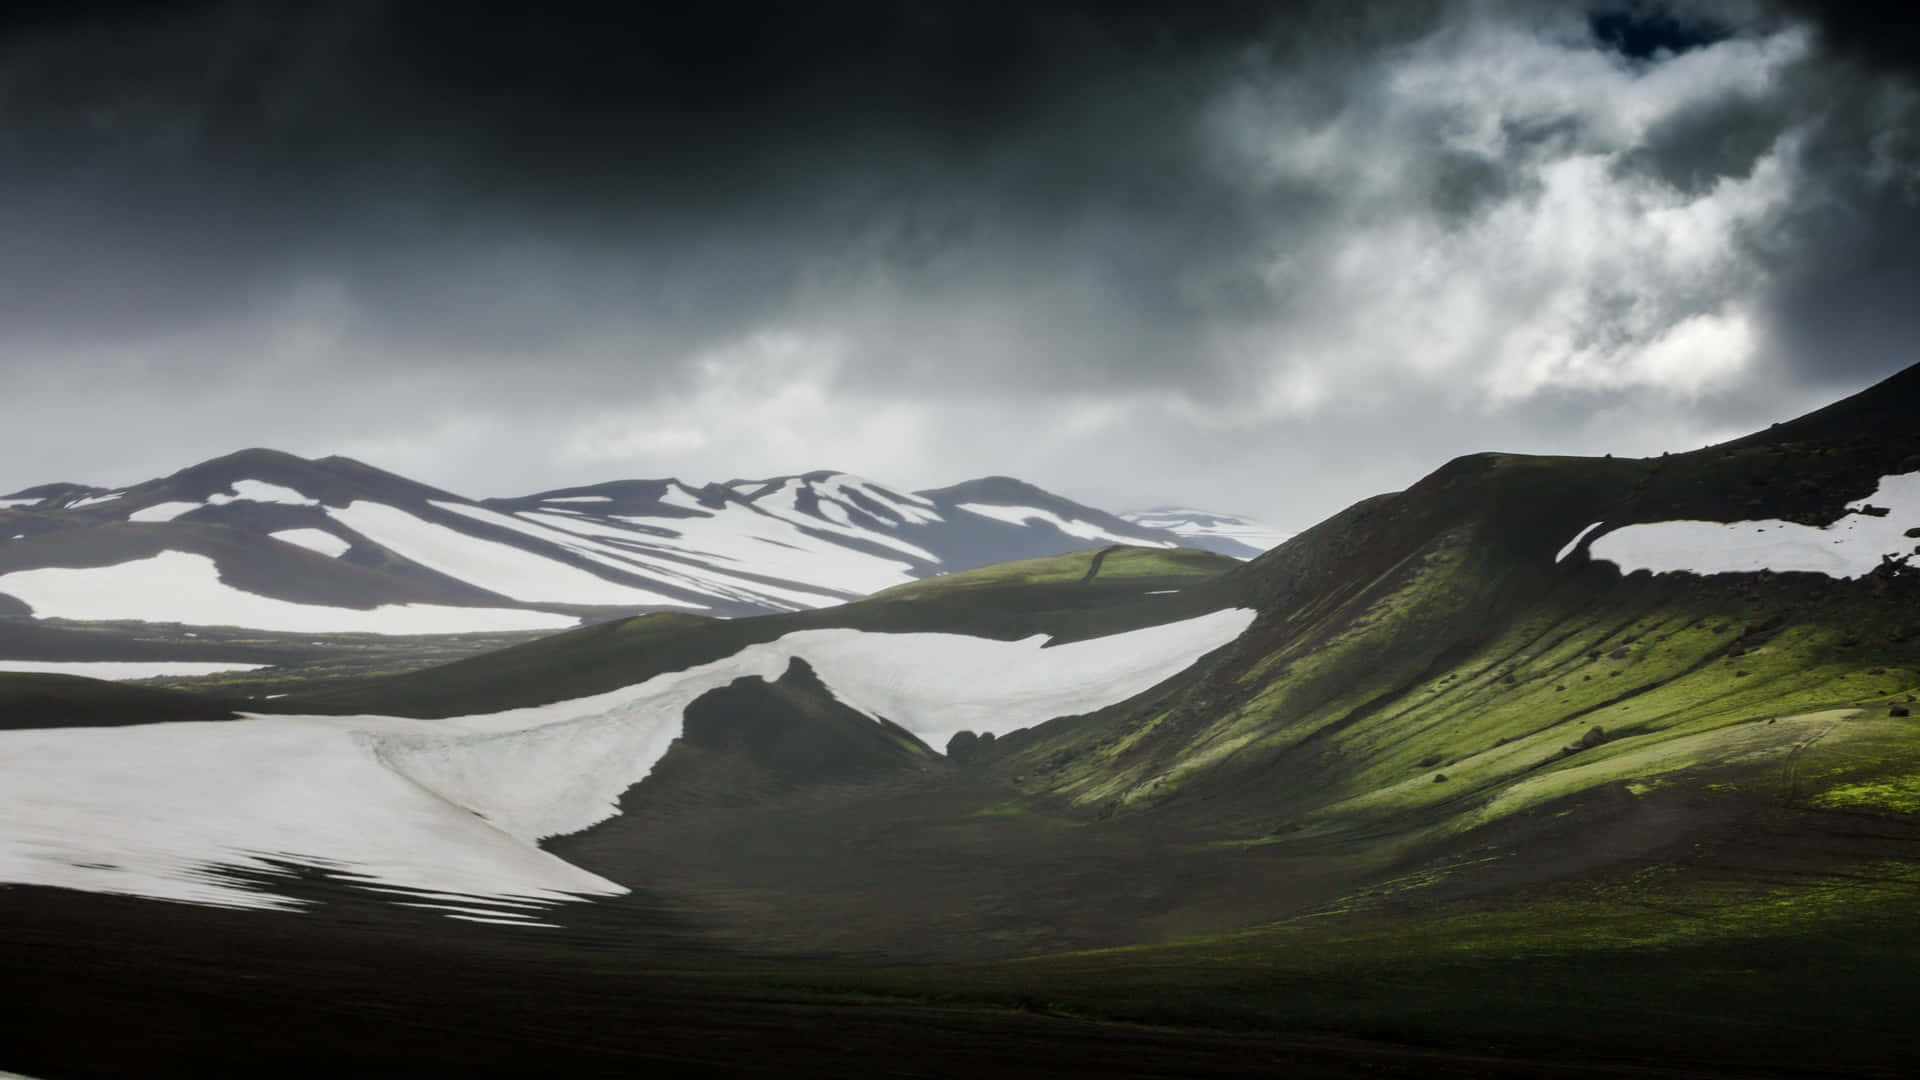 "The Breathtaking Views of Northern Iceland" Wallpaper